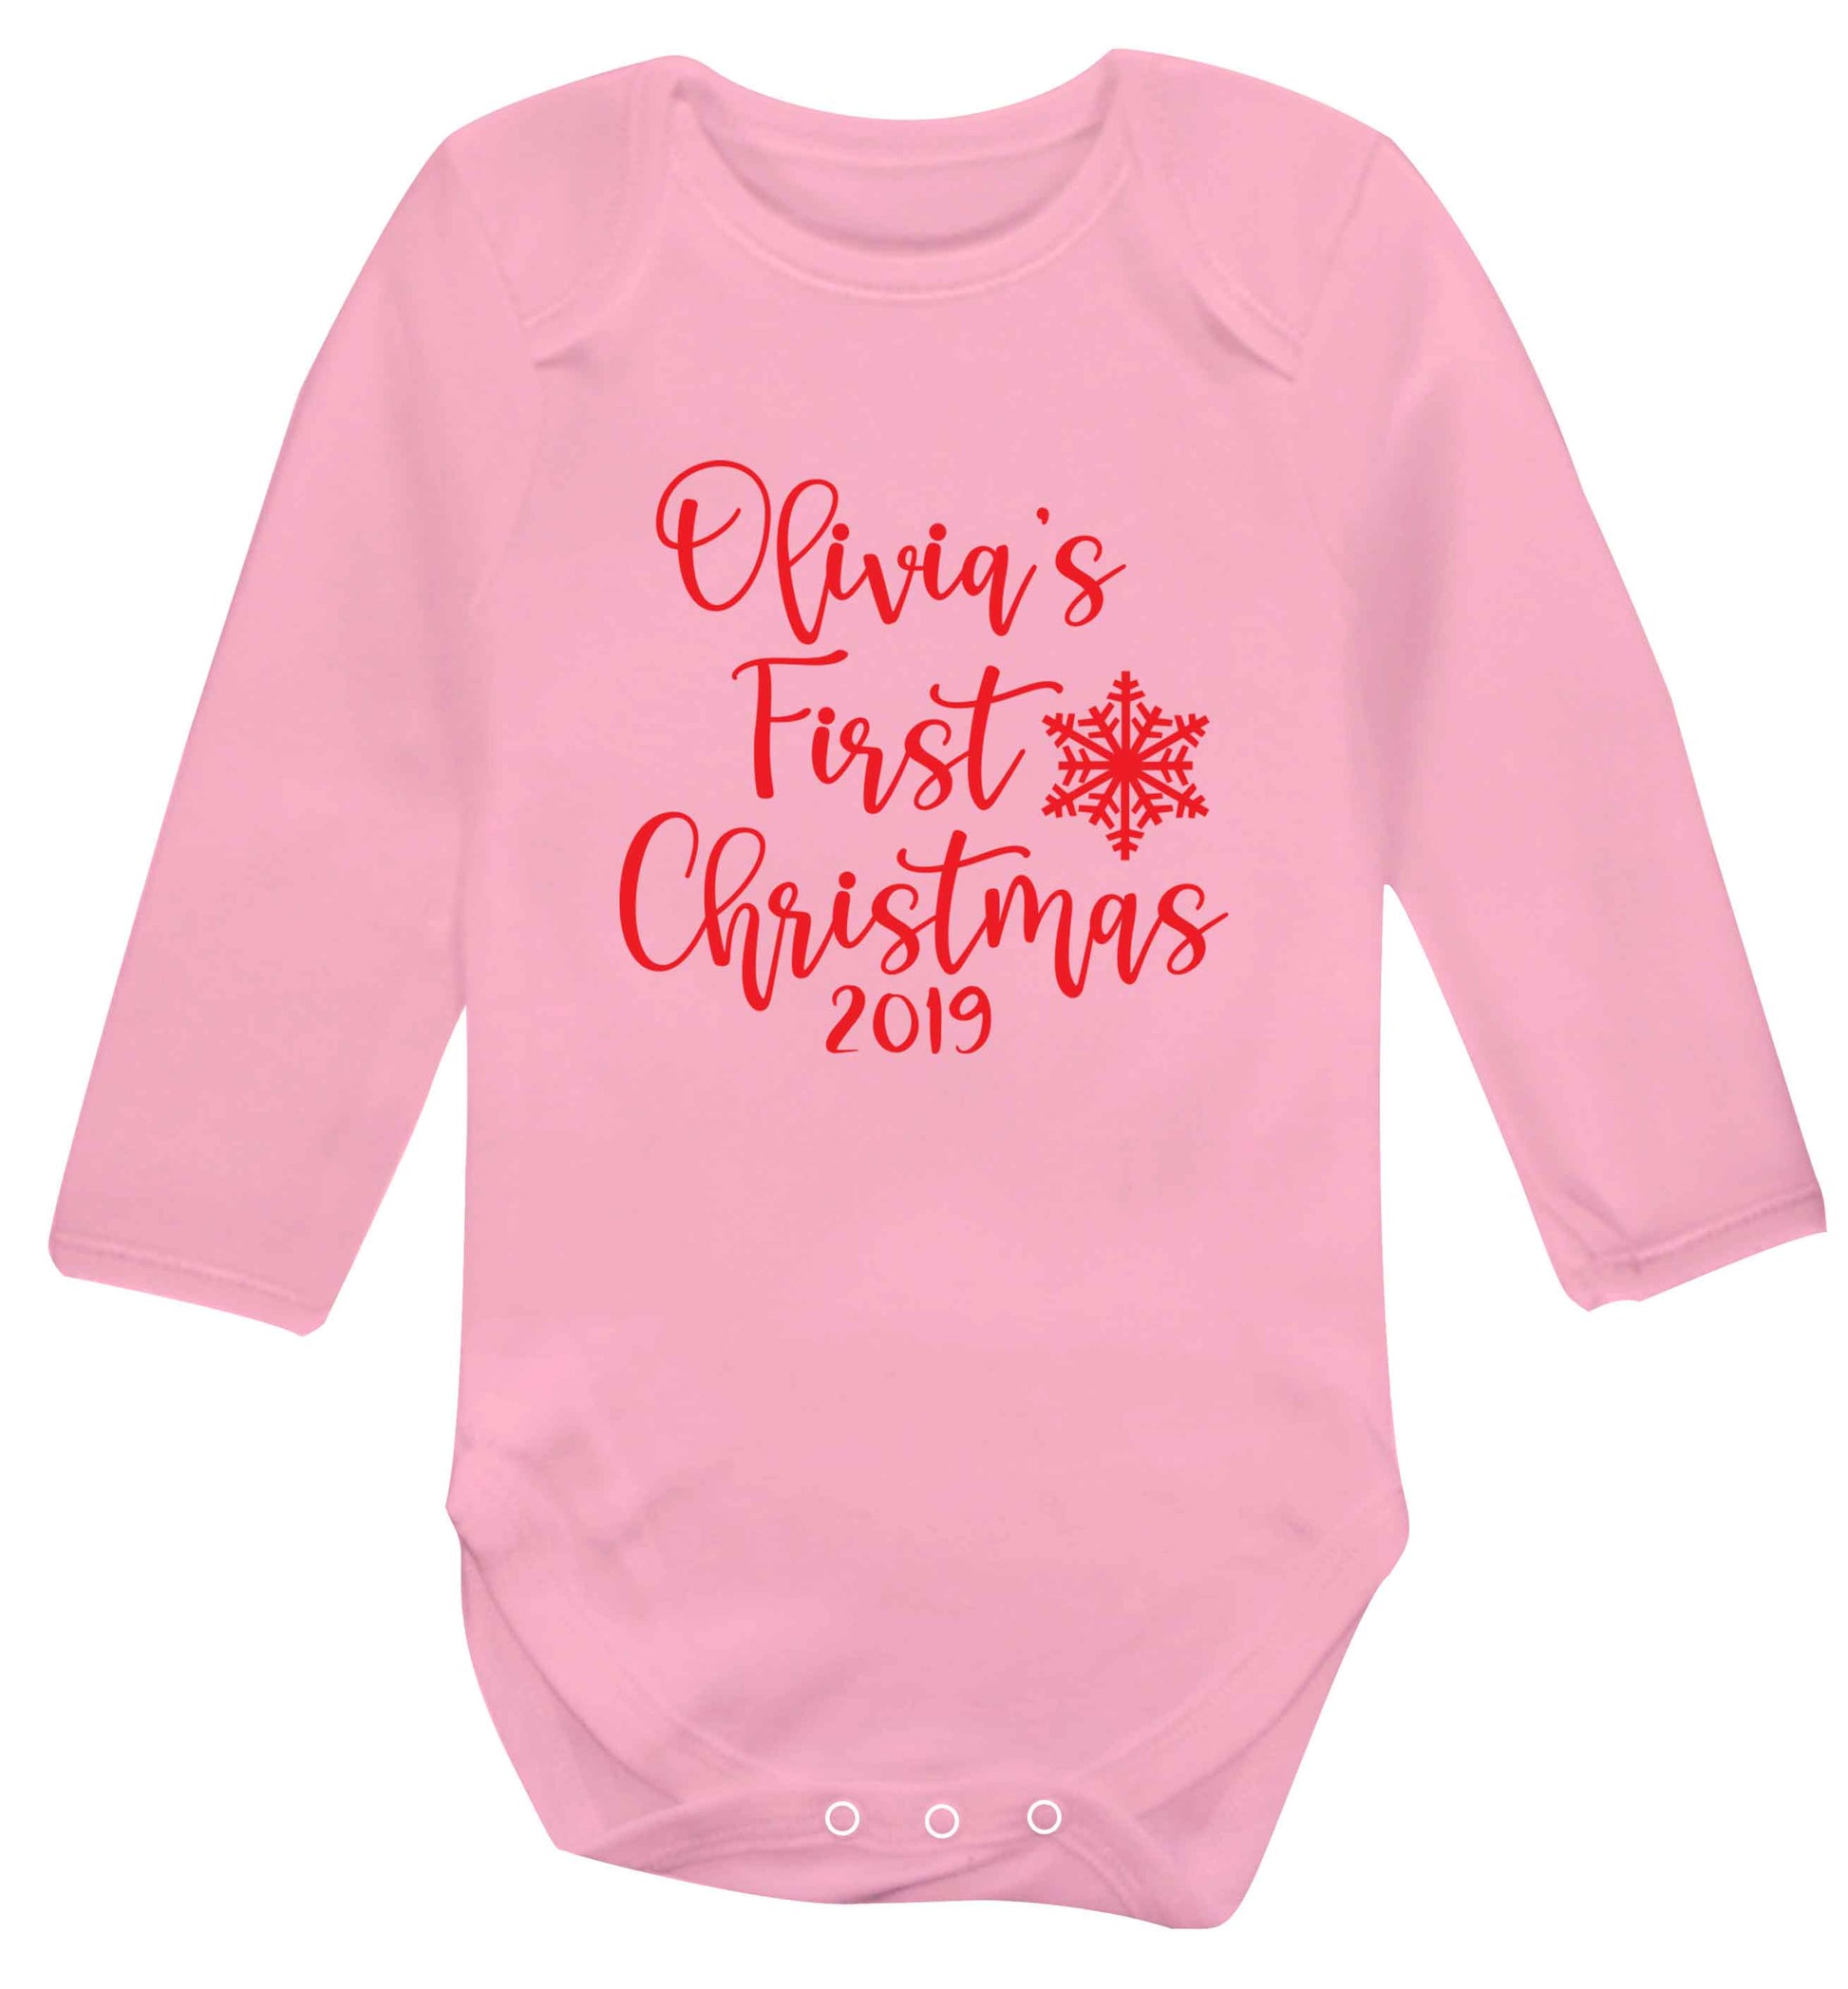 Personalised first Christmas - script text baby vest long sleeved pale pink 6-12 months